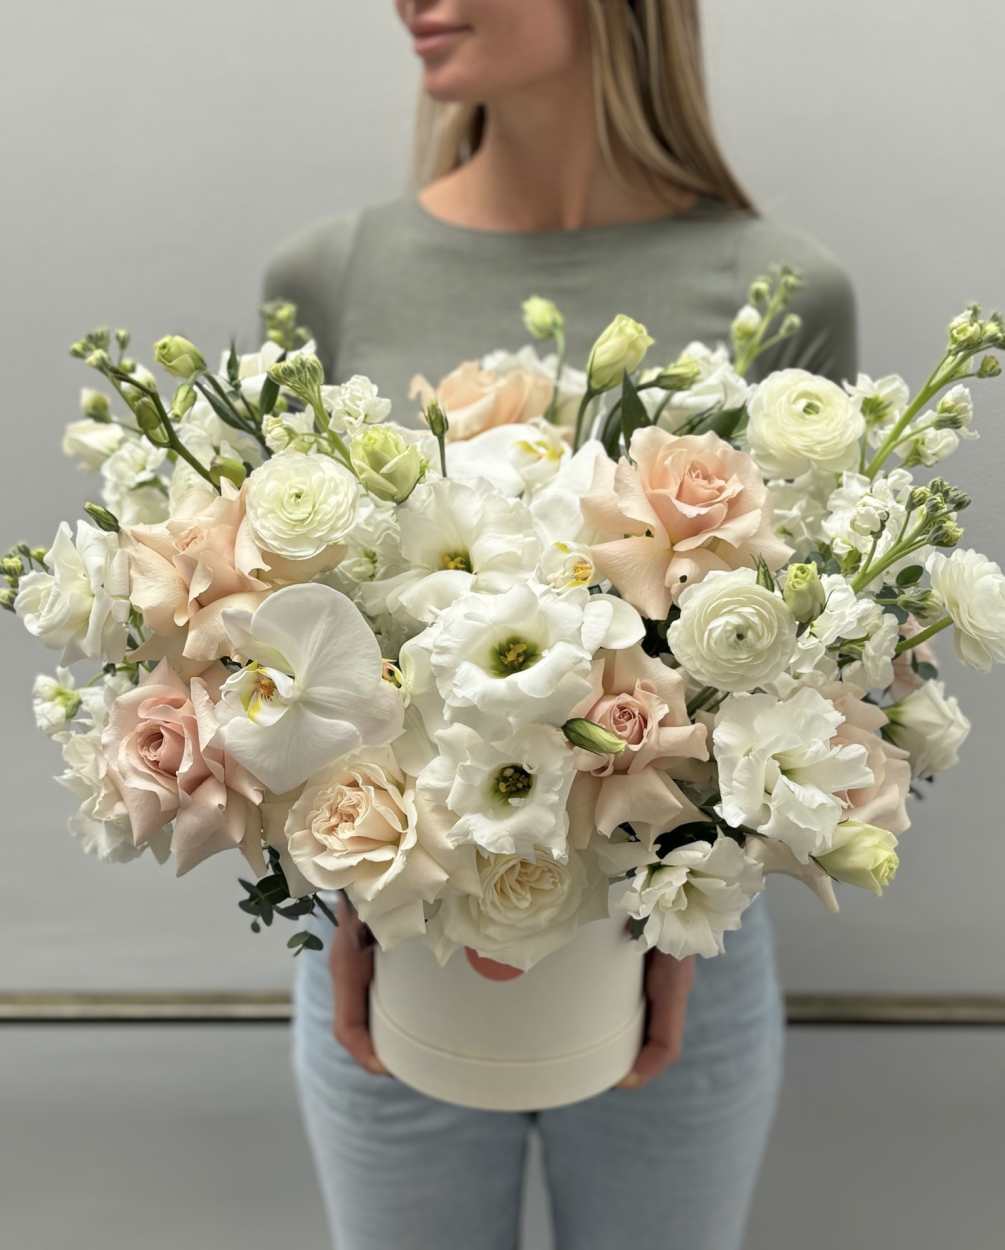 Unforgettable arrangement in a box made with garden roses, phalaenopsis orchid, roses